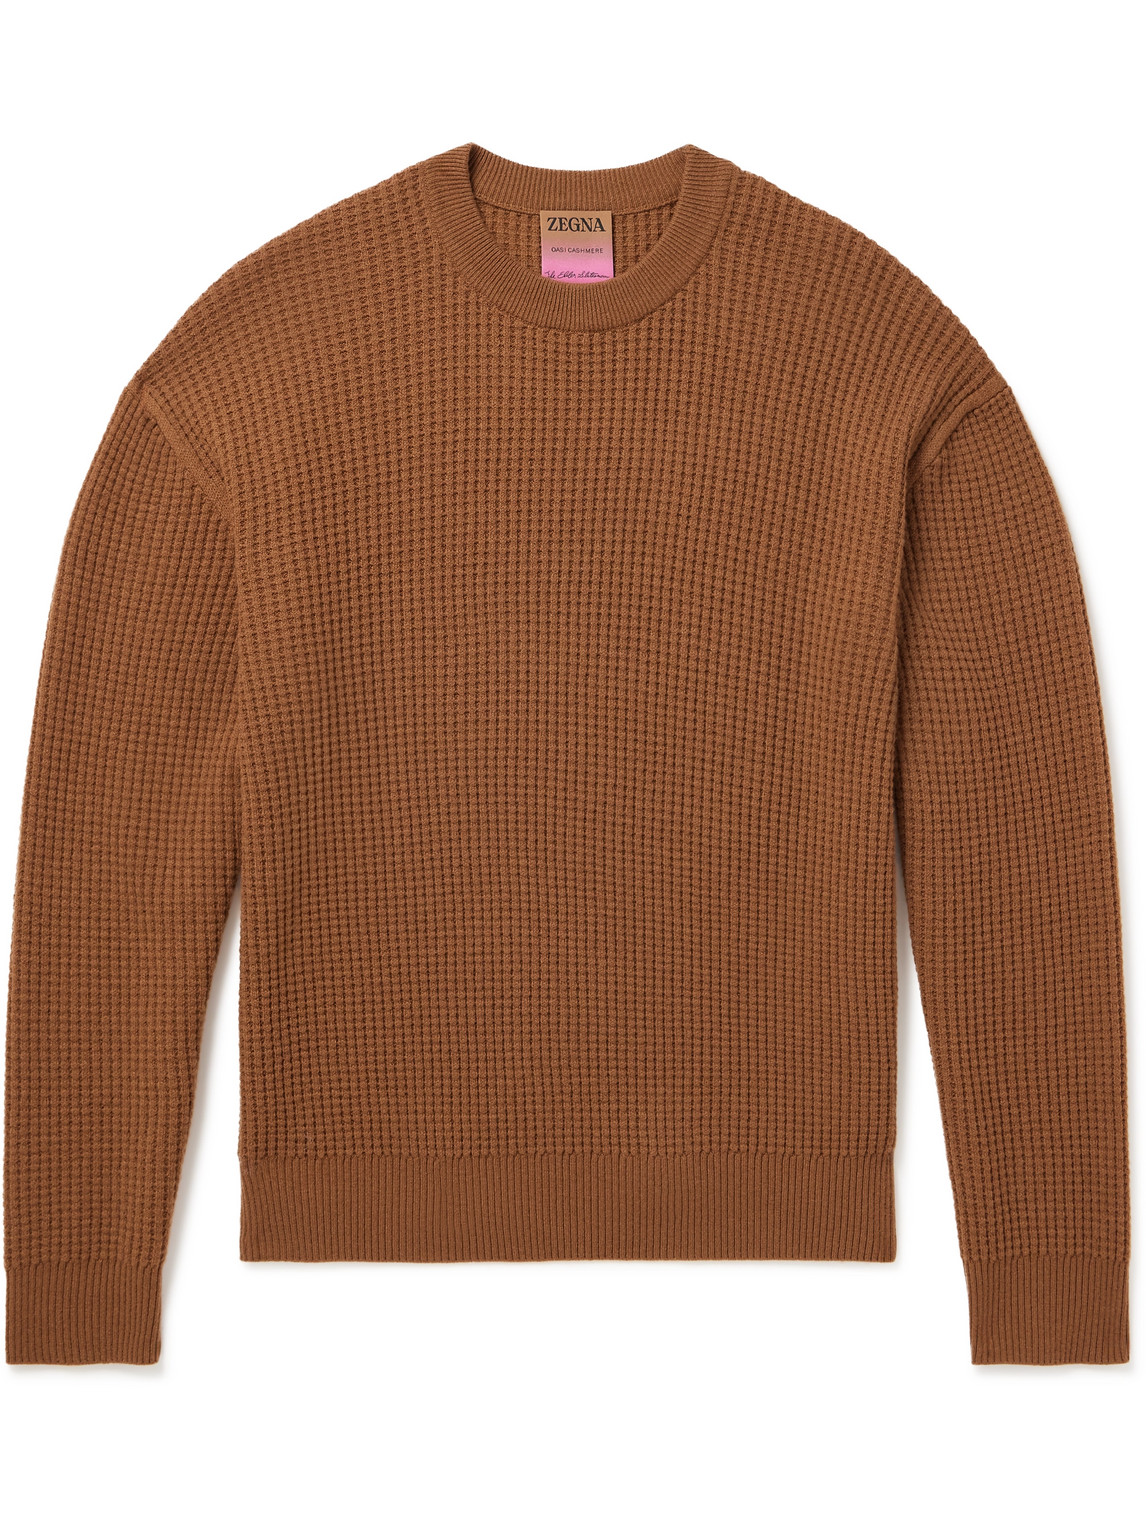 Zegna X The Elder Statesman Waffle-knit Oasi Cashmere Sweater In Brown